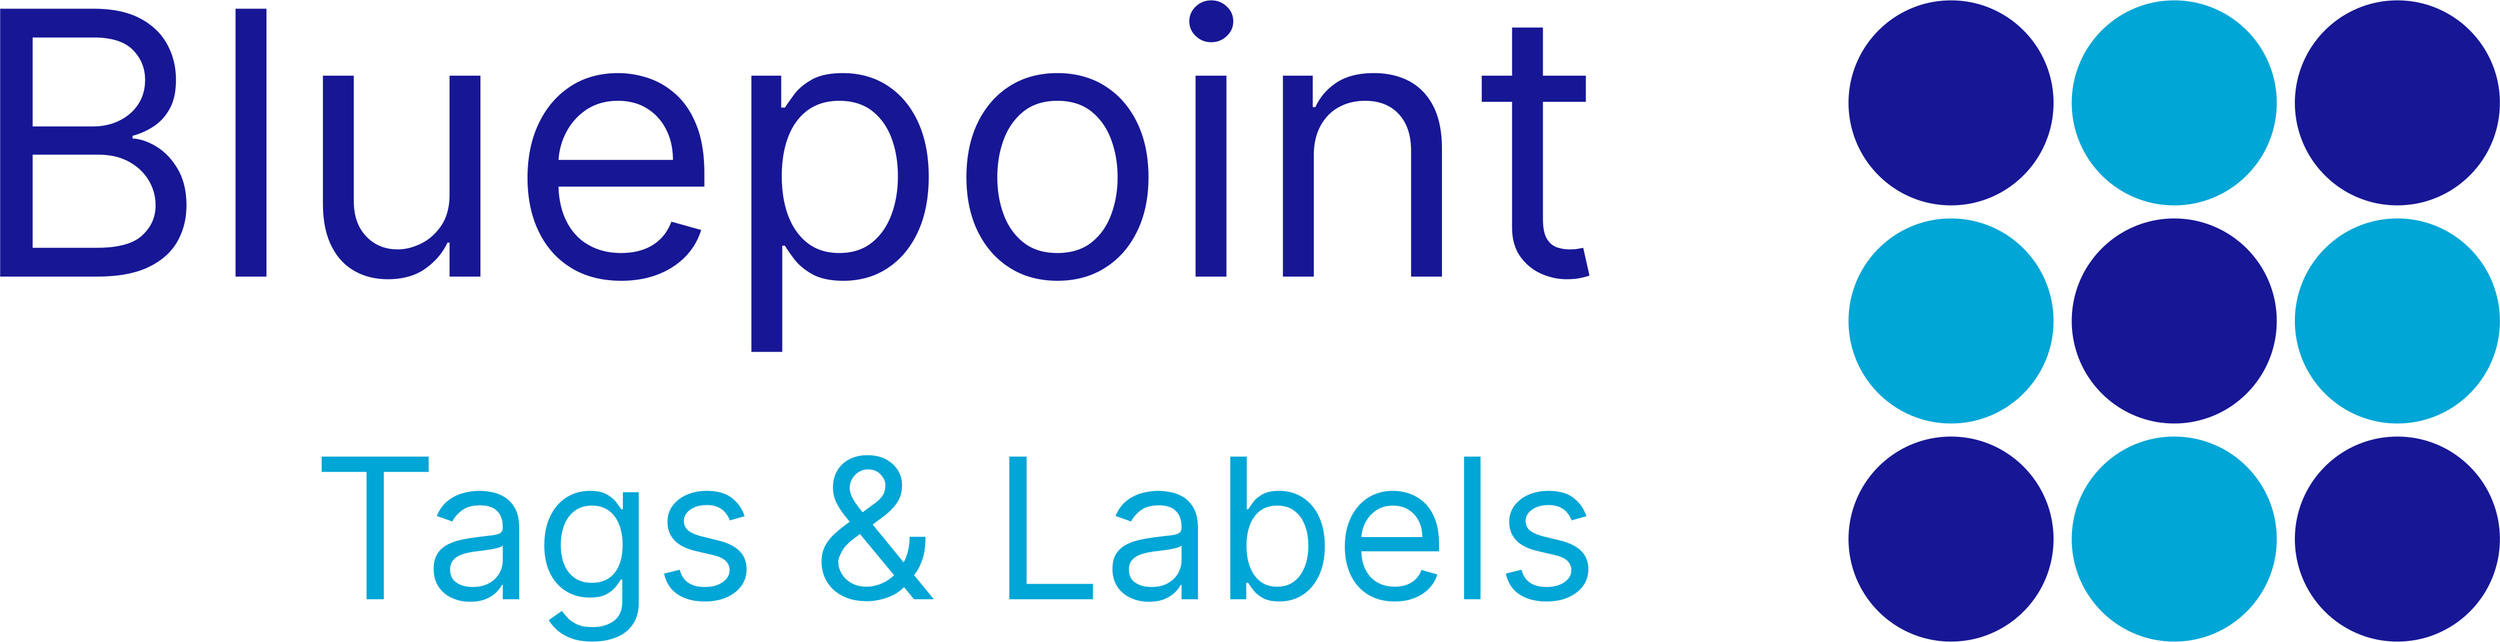 Bluepoint Tags and Labels - Logo.png